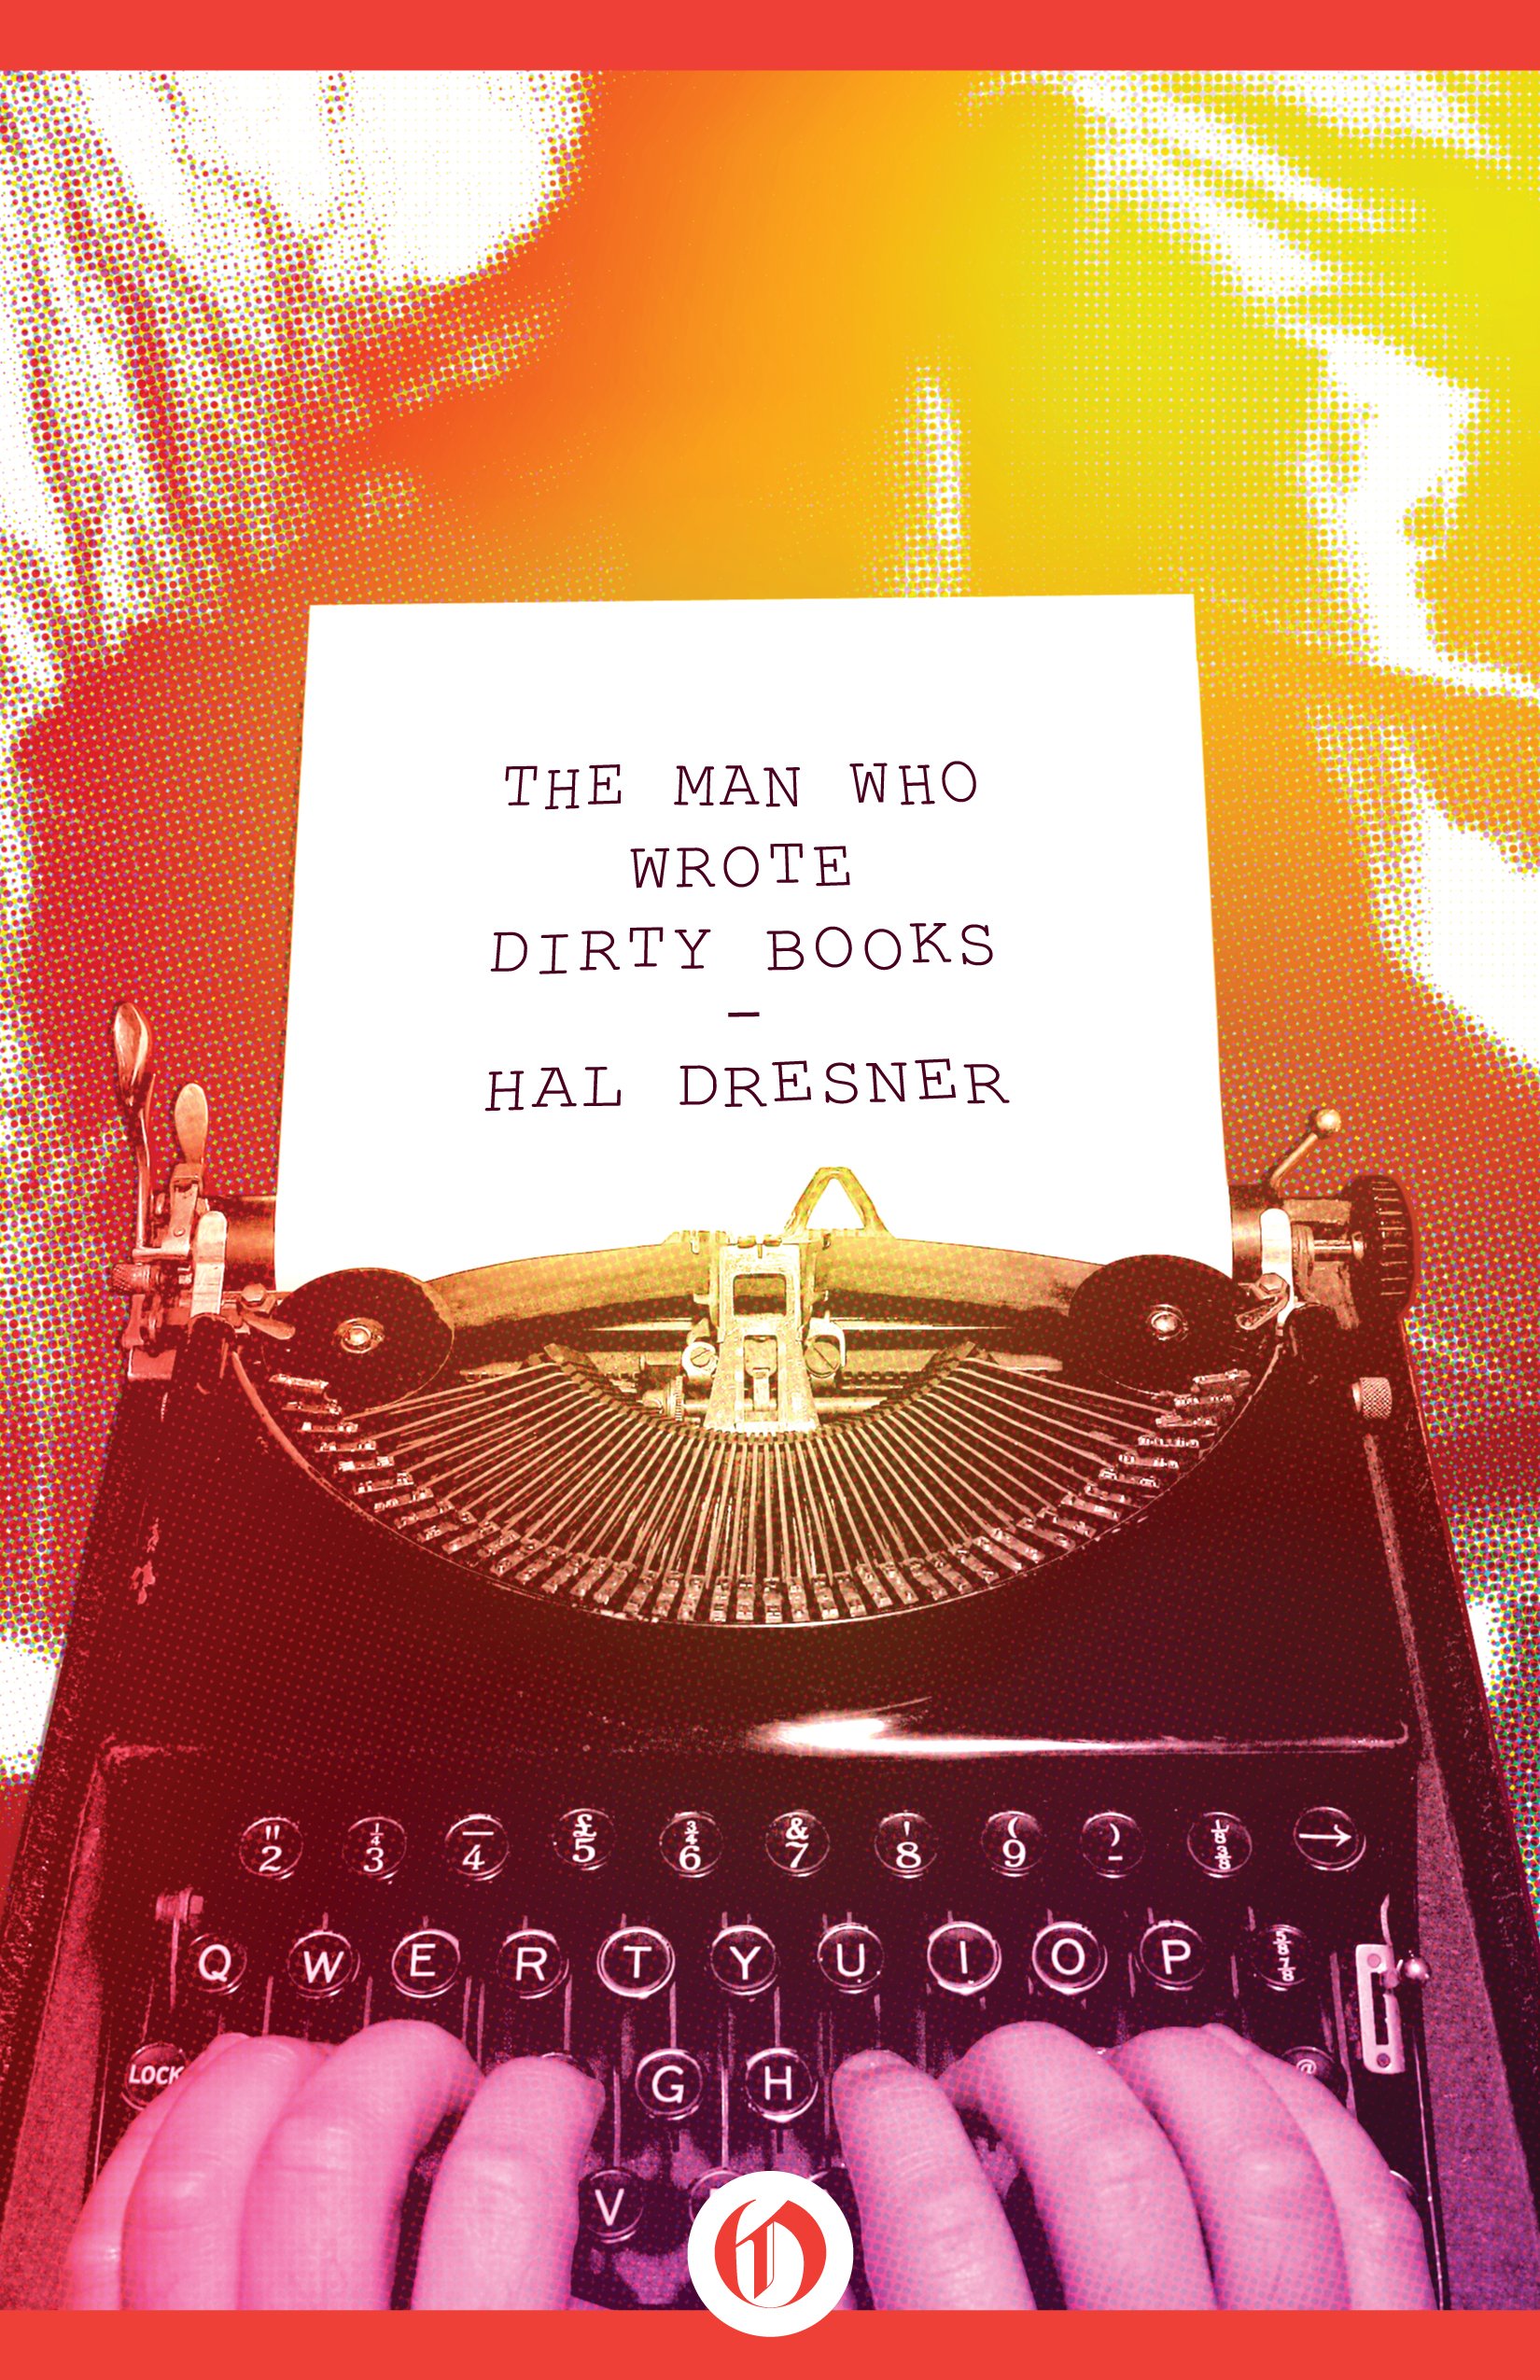 Friday Reads: The Man Who Wrote Dirty Books by Hal Dresner